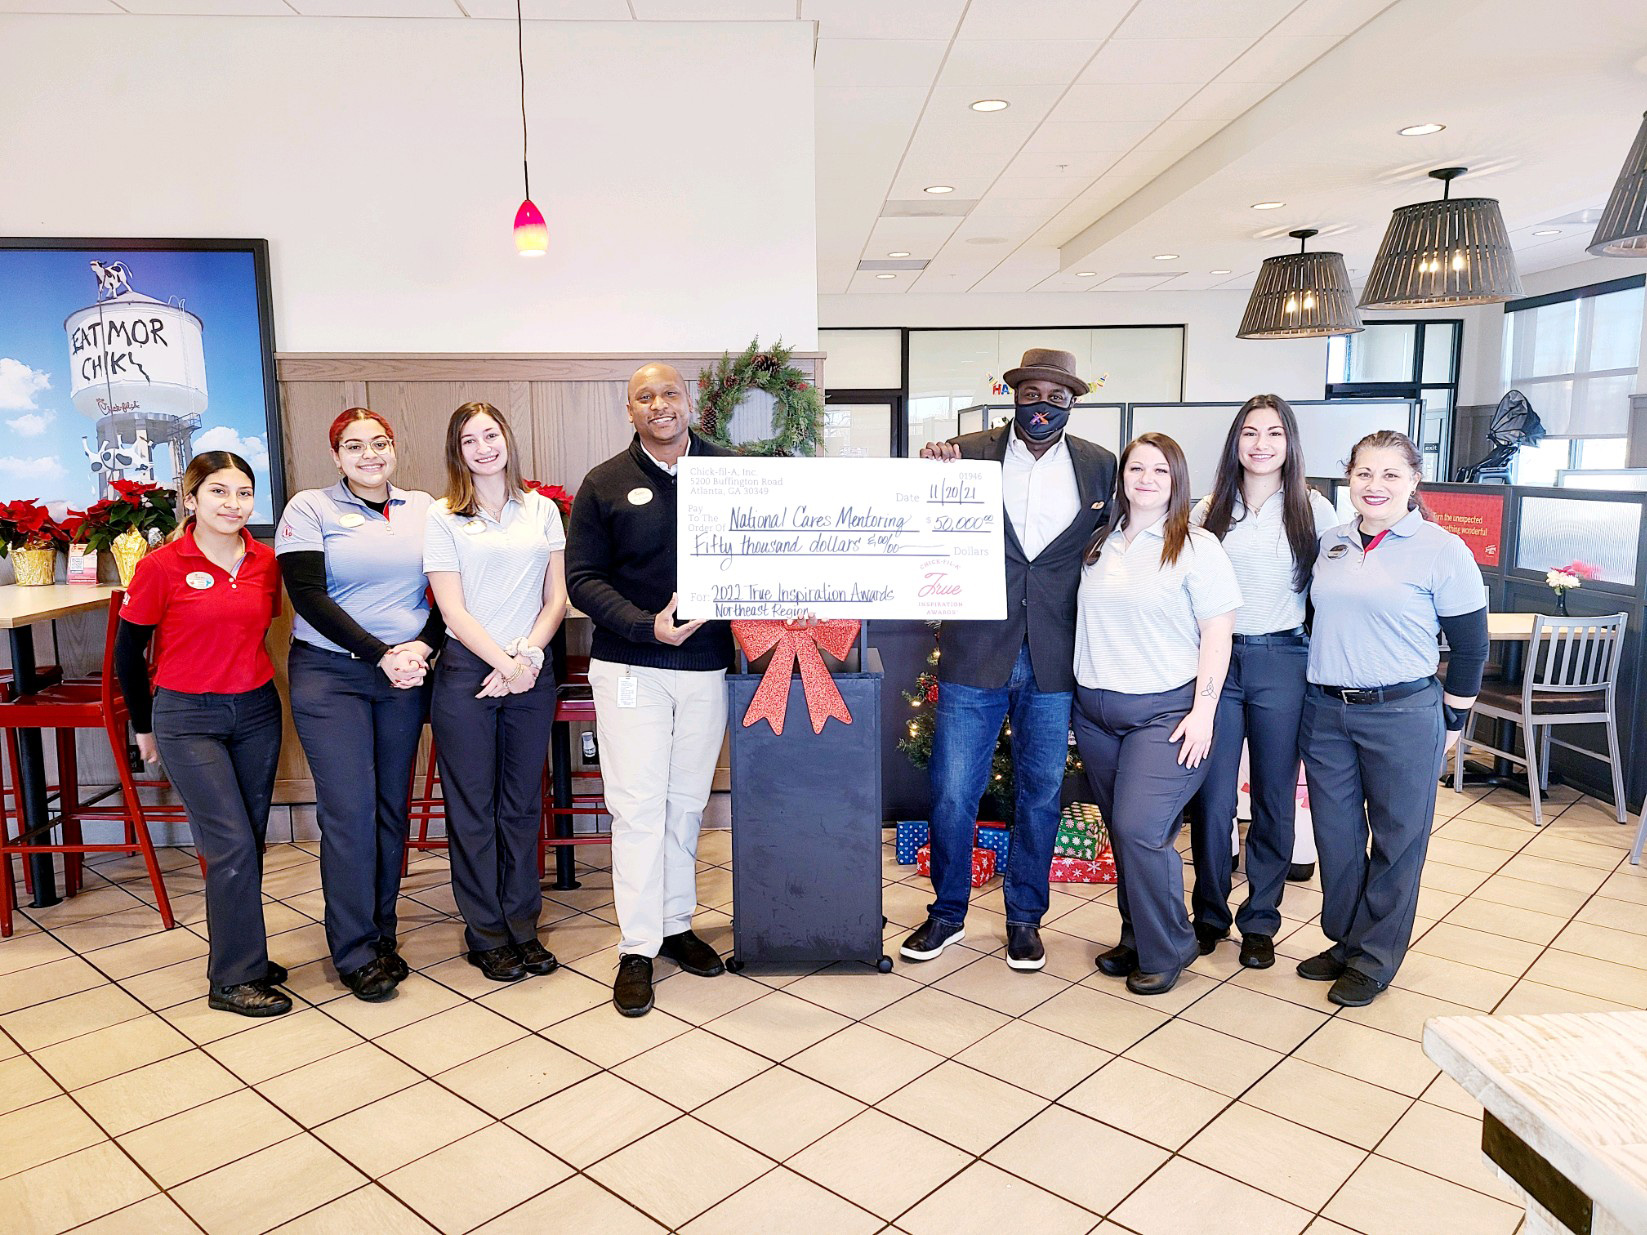 Chick-fil-A gives $5 million in True Inspiration Awards grants to 34 organizations across the country making an impact in their local communities.